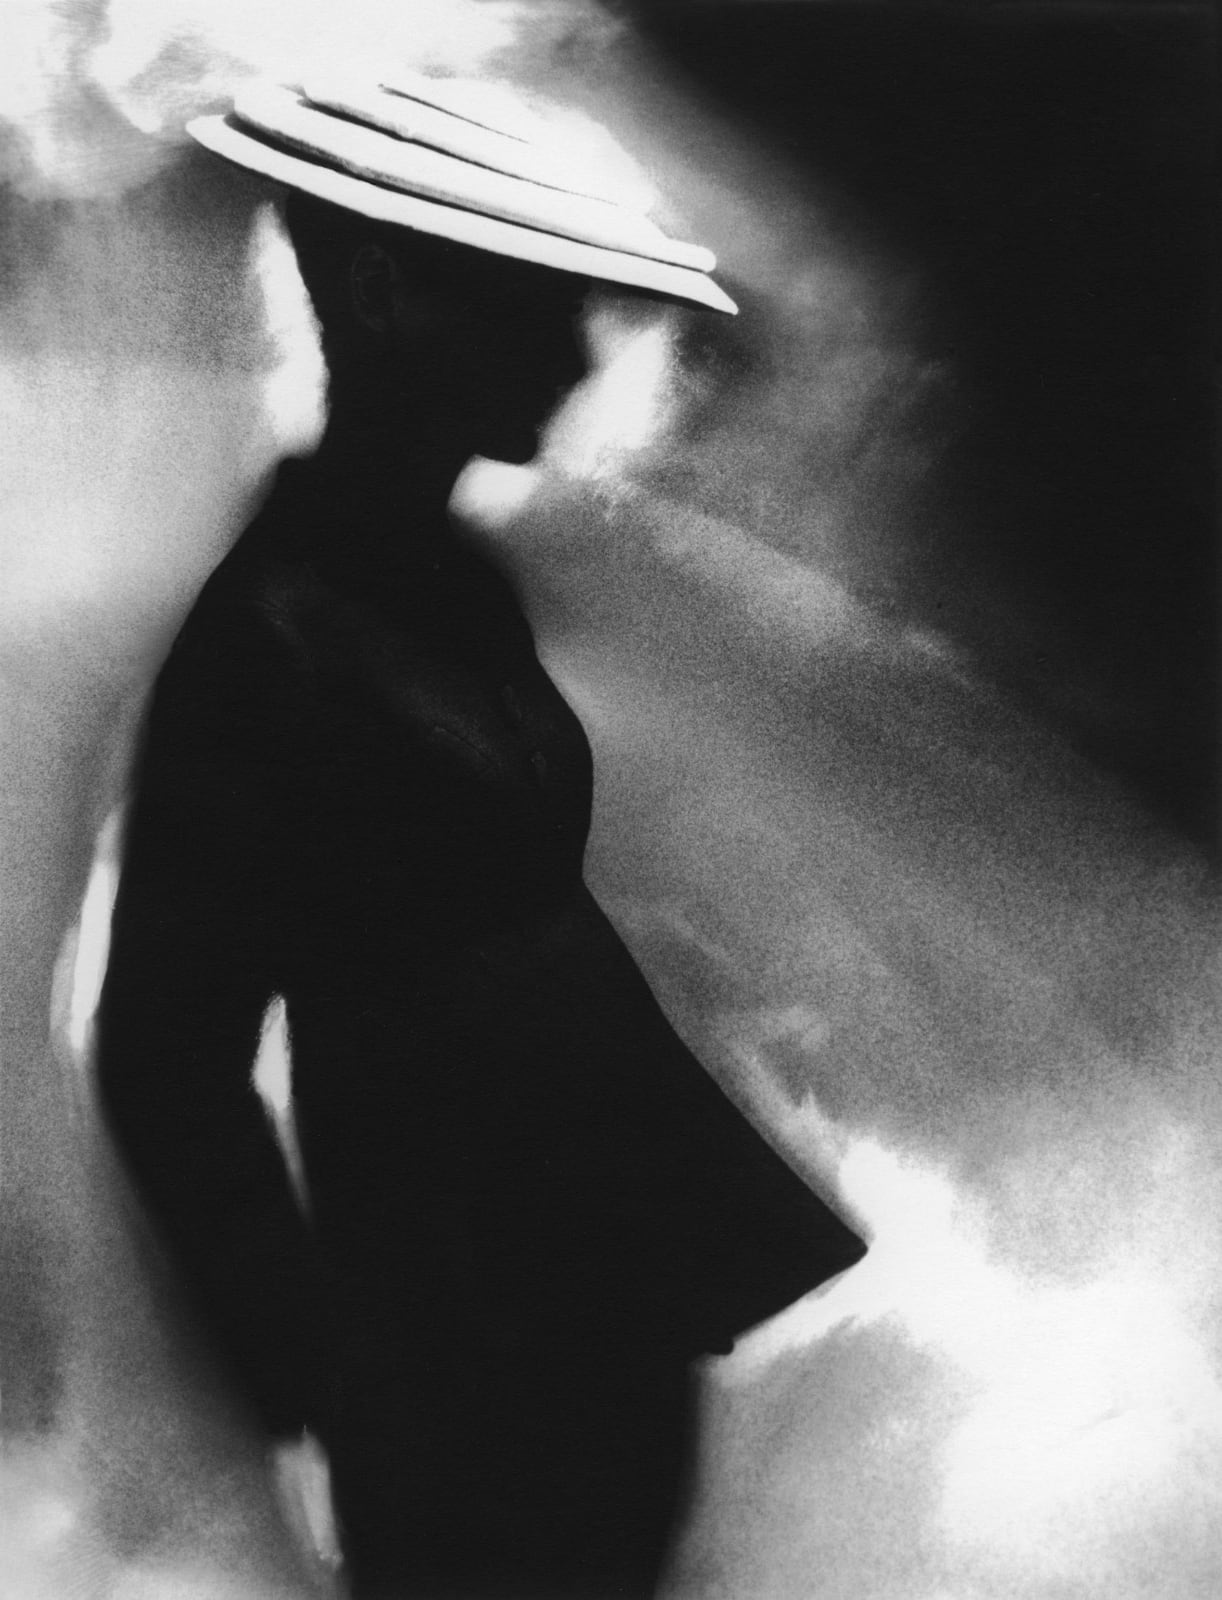 Lillian Bassman photograph of silhouetted woman in tunit suit and hat